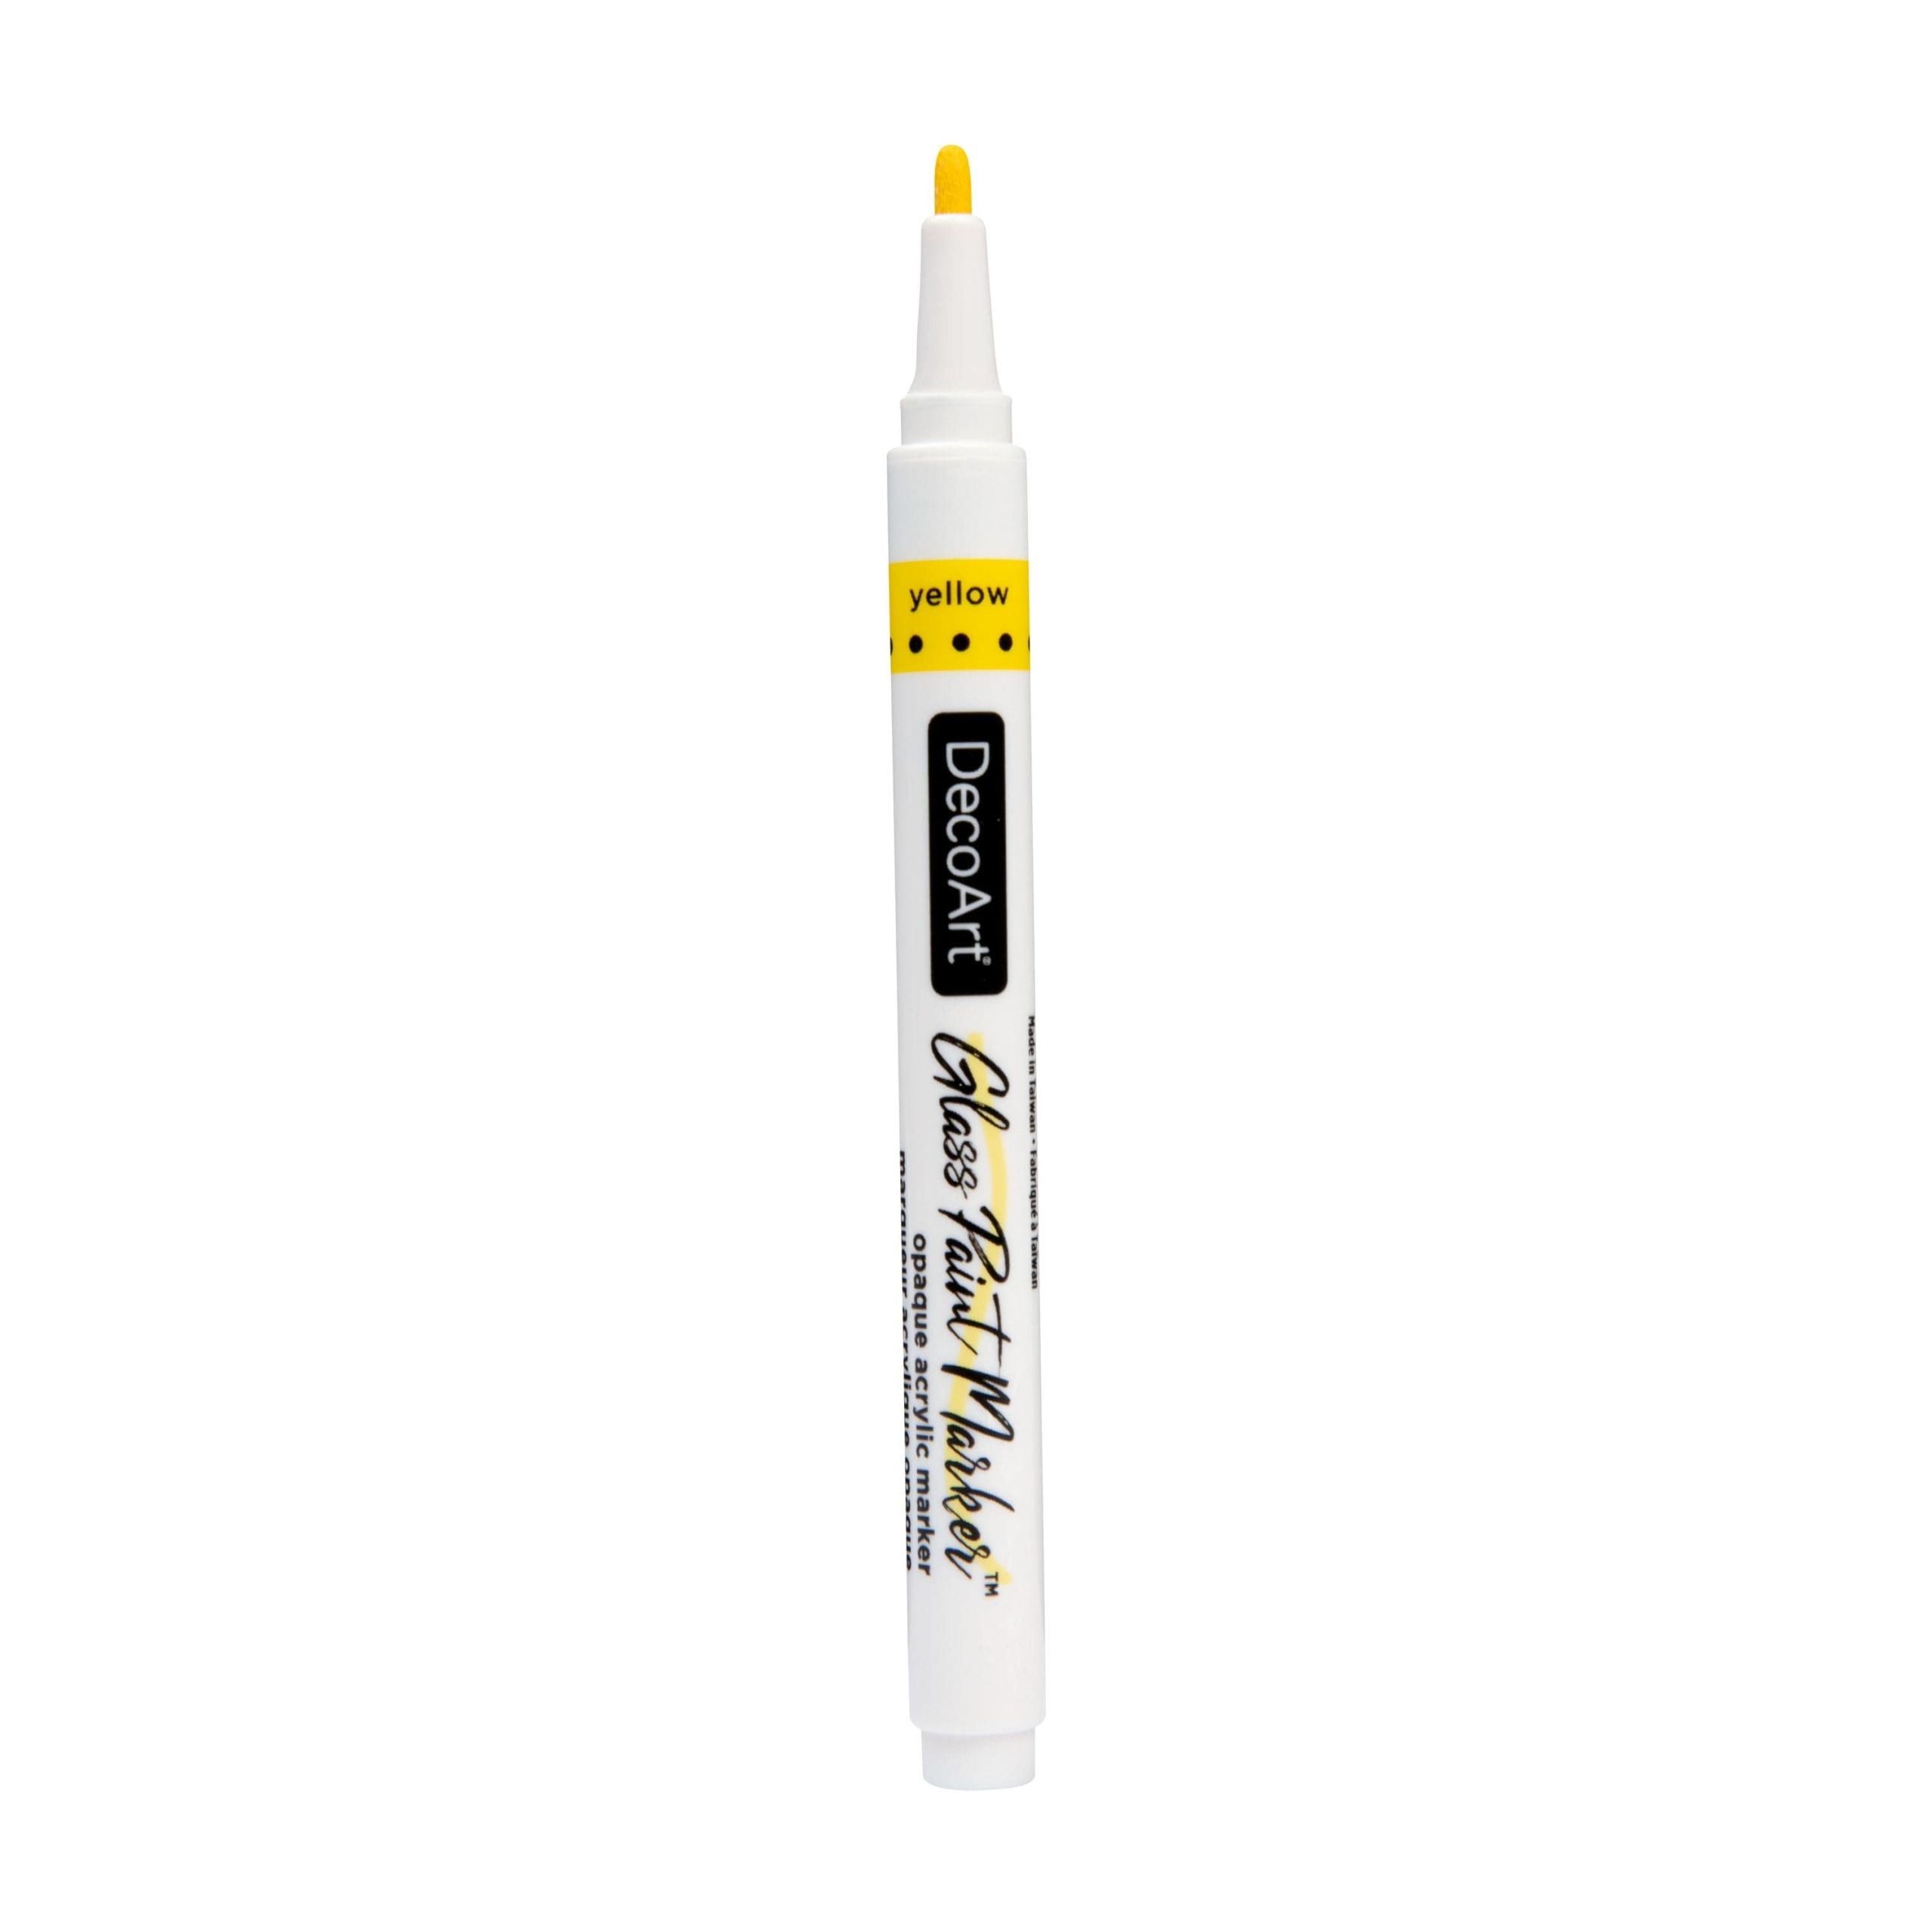 Shop smarter, save more by using DecoArt Glass Paint Marker 1mm